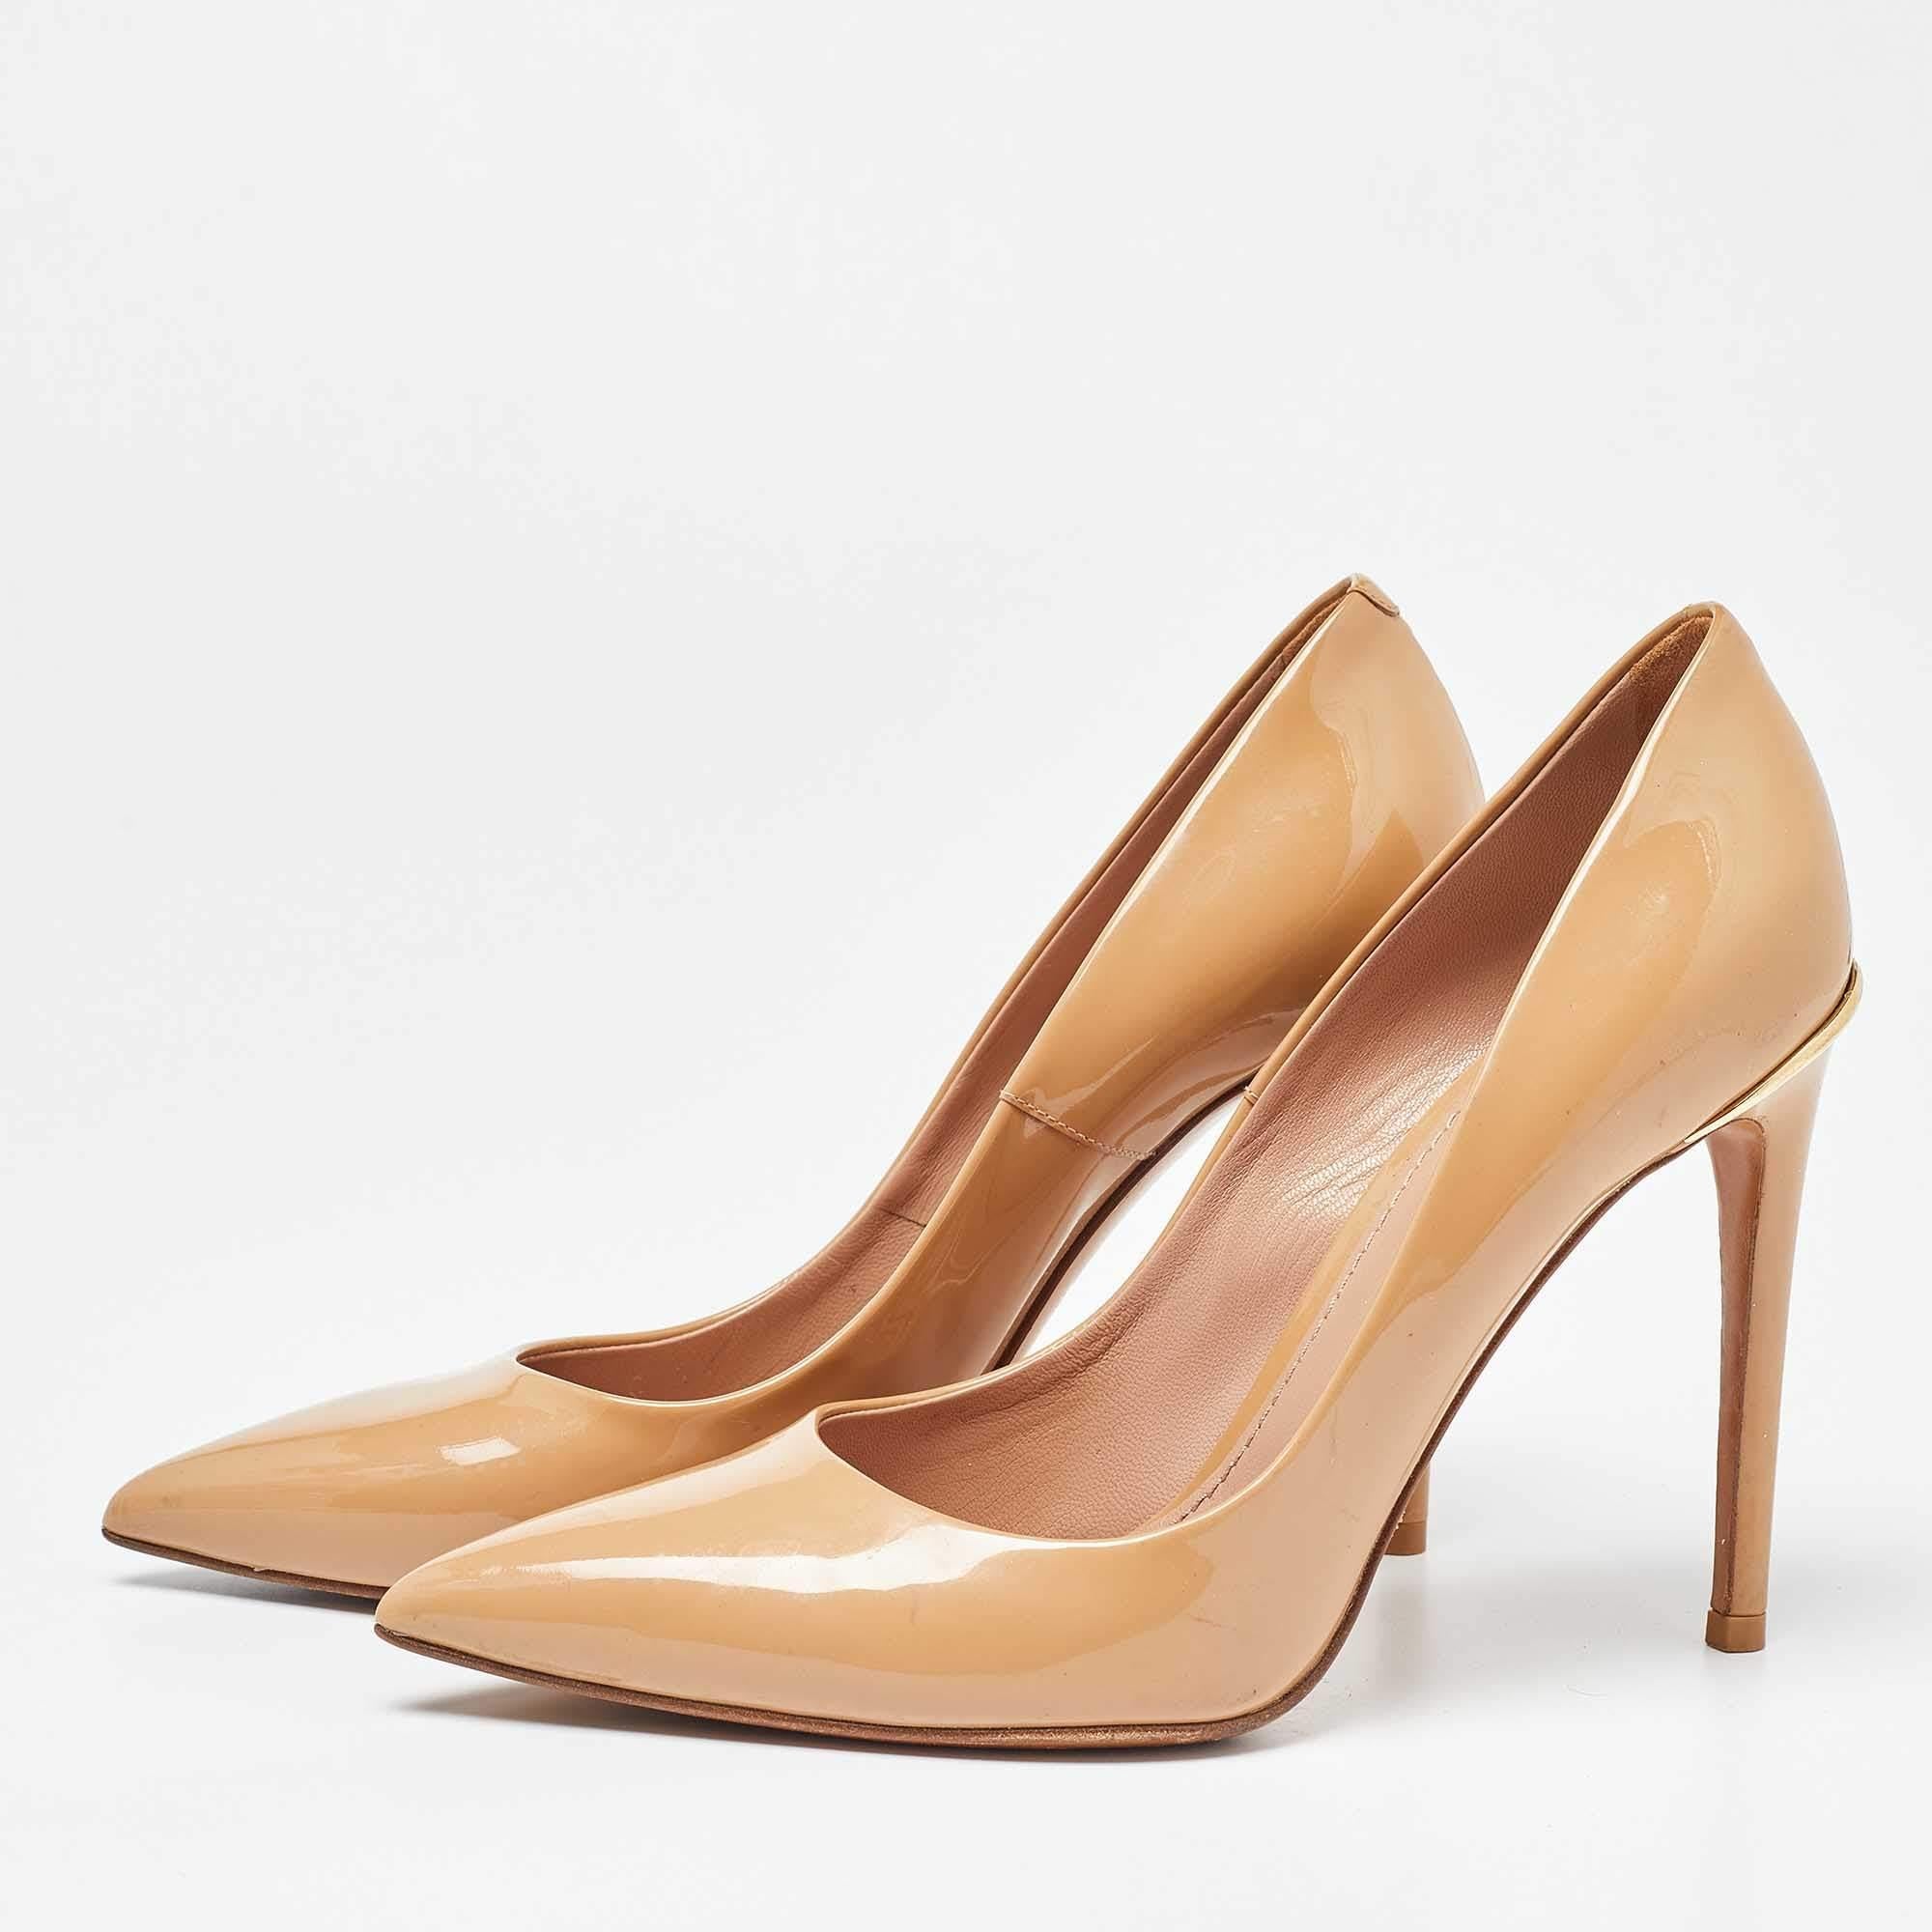 Exhibit an elegant style with this pair of pumps. These elegant shoes are crafted from quality materials. They are set on durable soles and sleek heels.

Includes: Original Dustbag